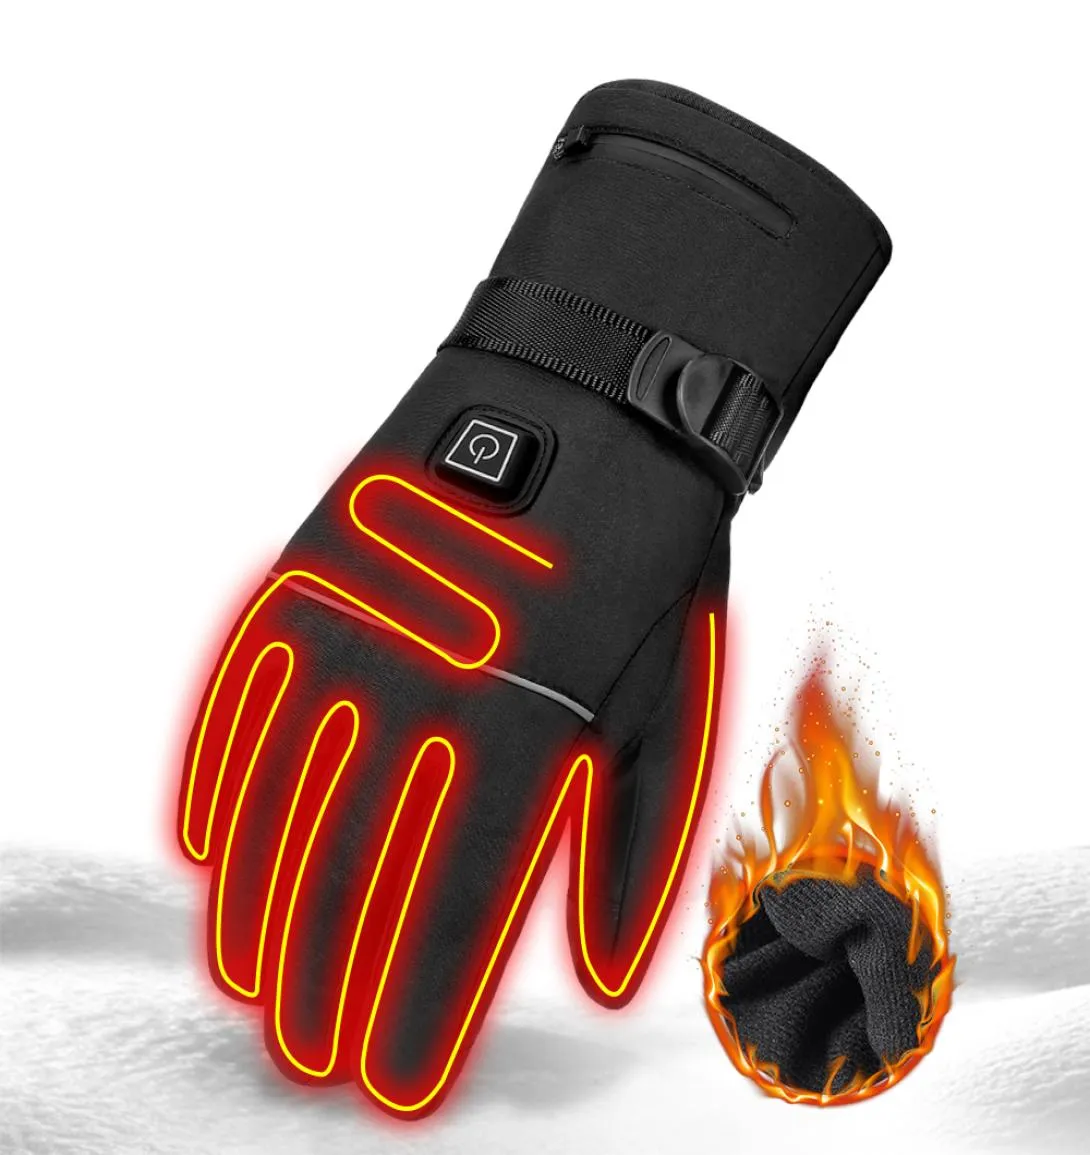 HEROBIKER Motorcycle Gloves Waterproof Heated Guantes Moto Touch Screen Battery Powered Motorbike Racing Riding Gloves Winter4560345